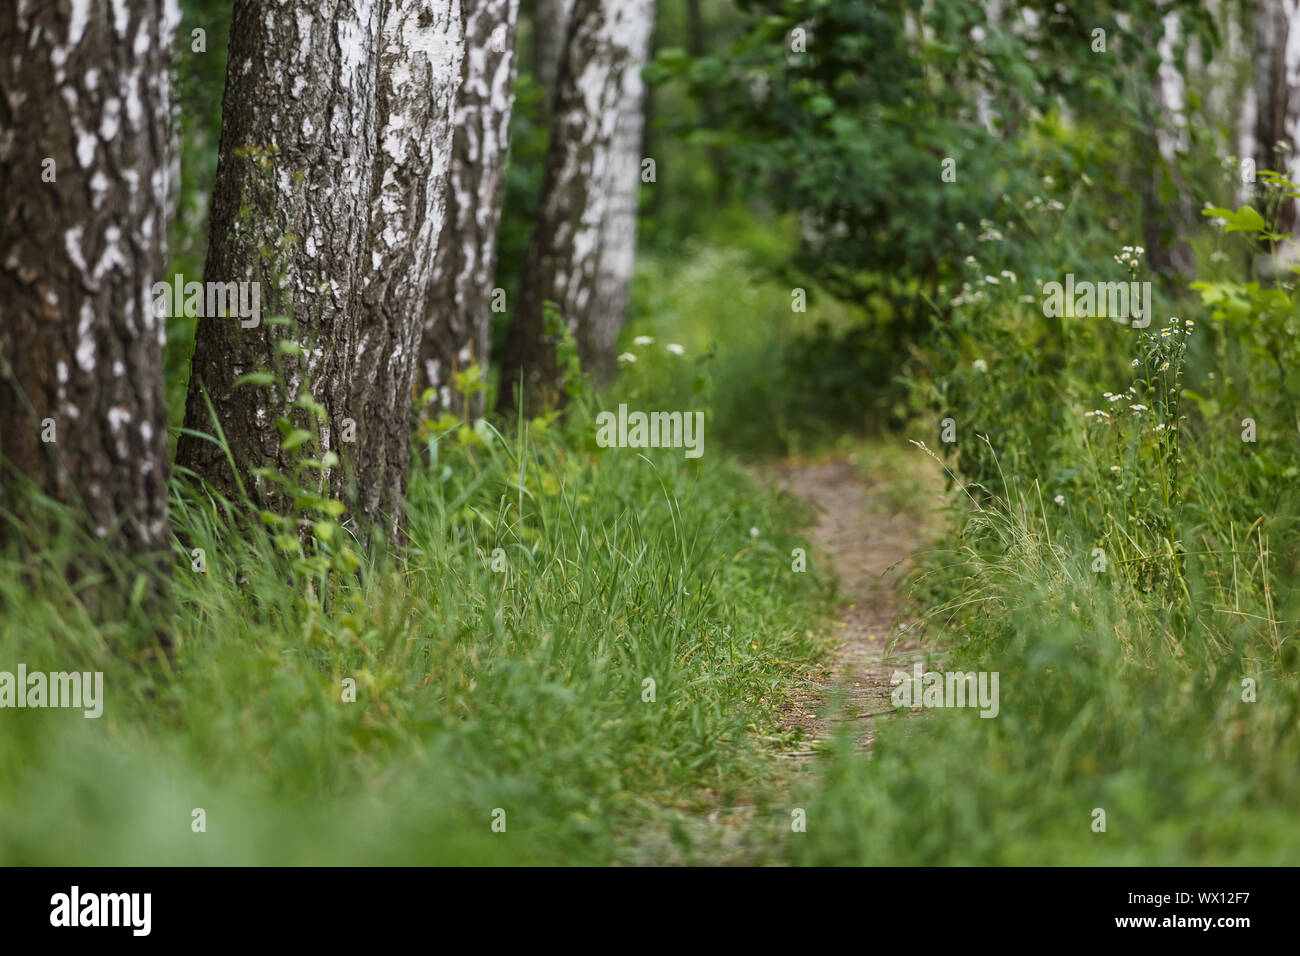 Natural background , birch grove, road, path among birches, landscape, forest, Stock Photo